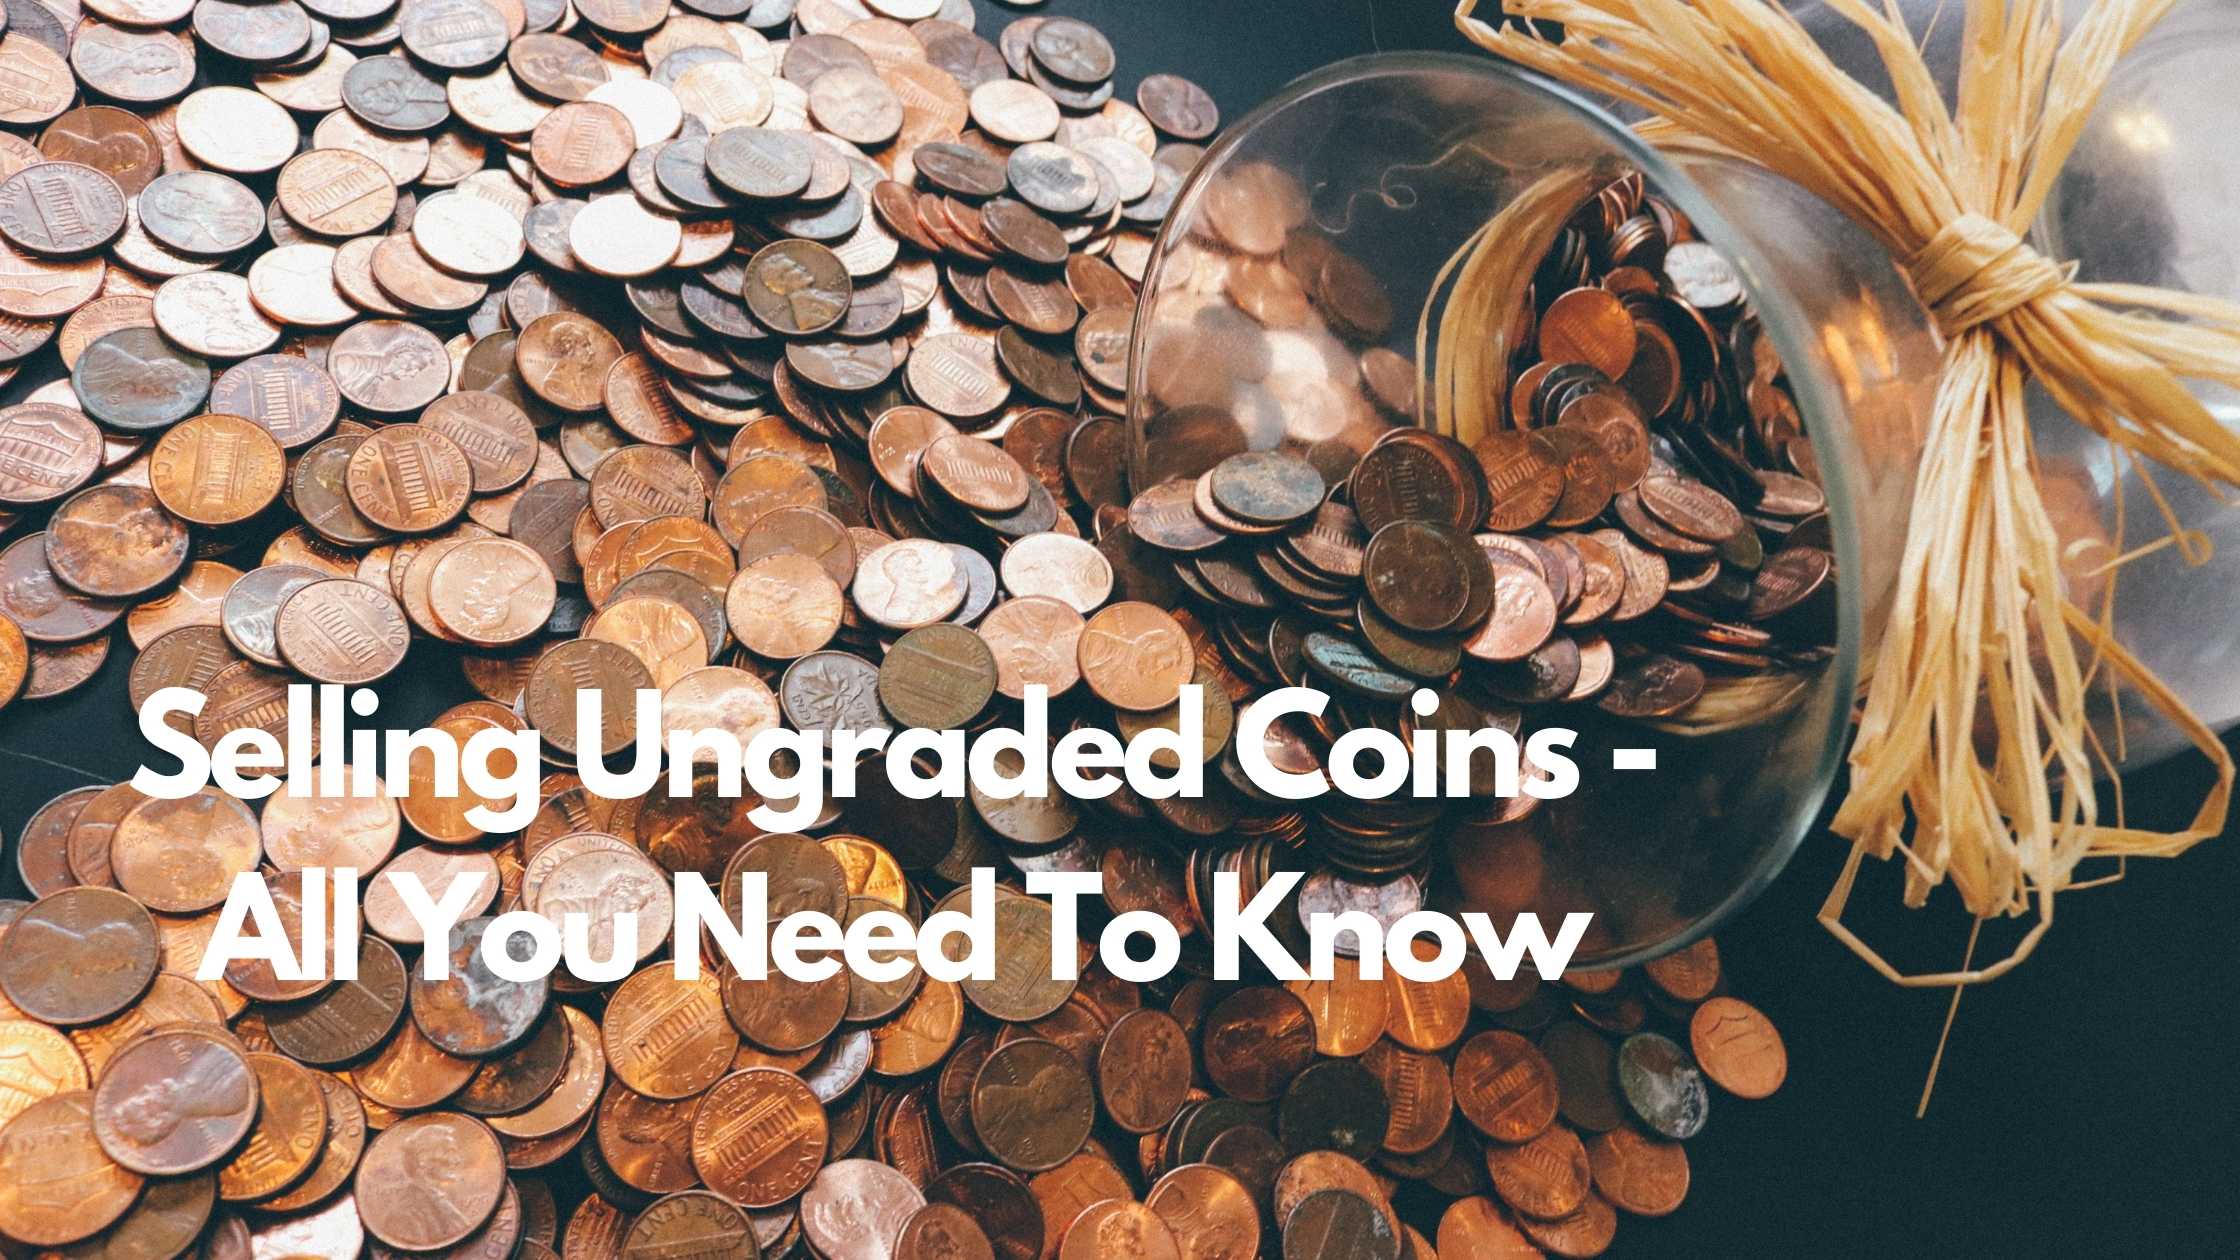 Selling Ungraded Coins All You Need To Know